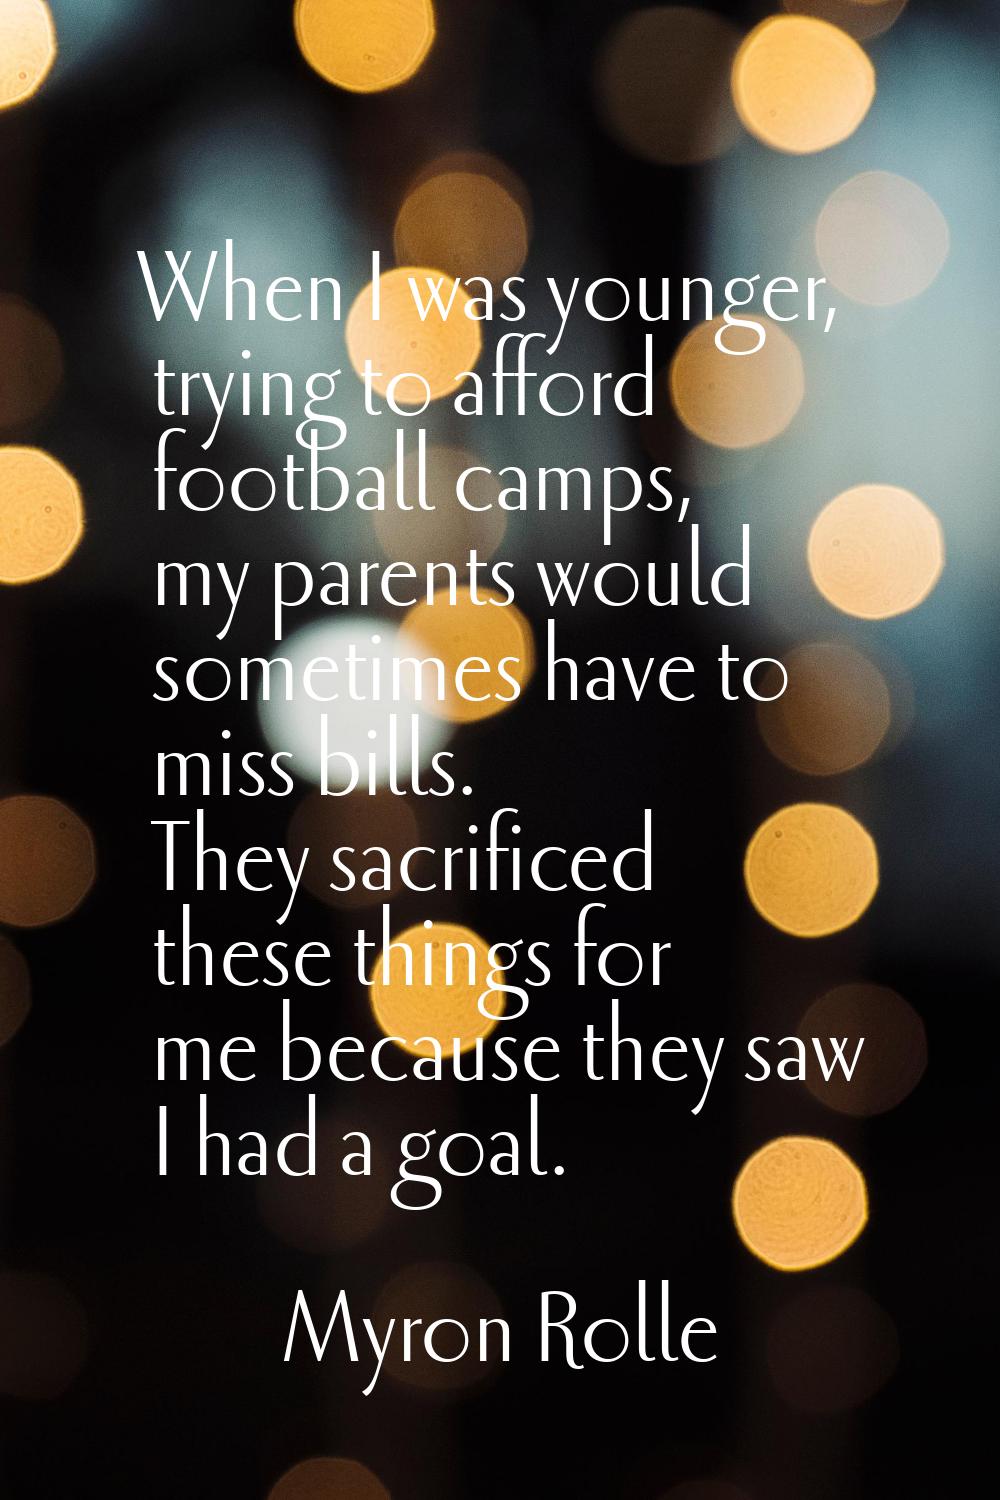 When I was younger, trying to afford football camps, my parents would sometimes have to miss bills.